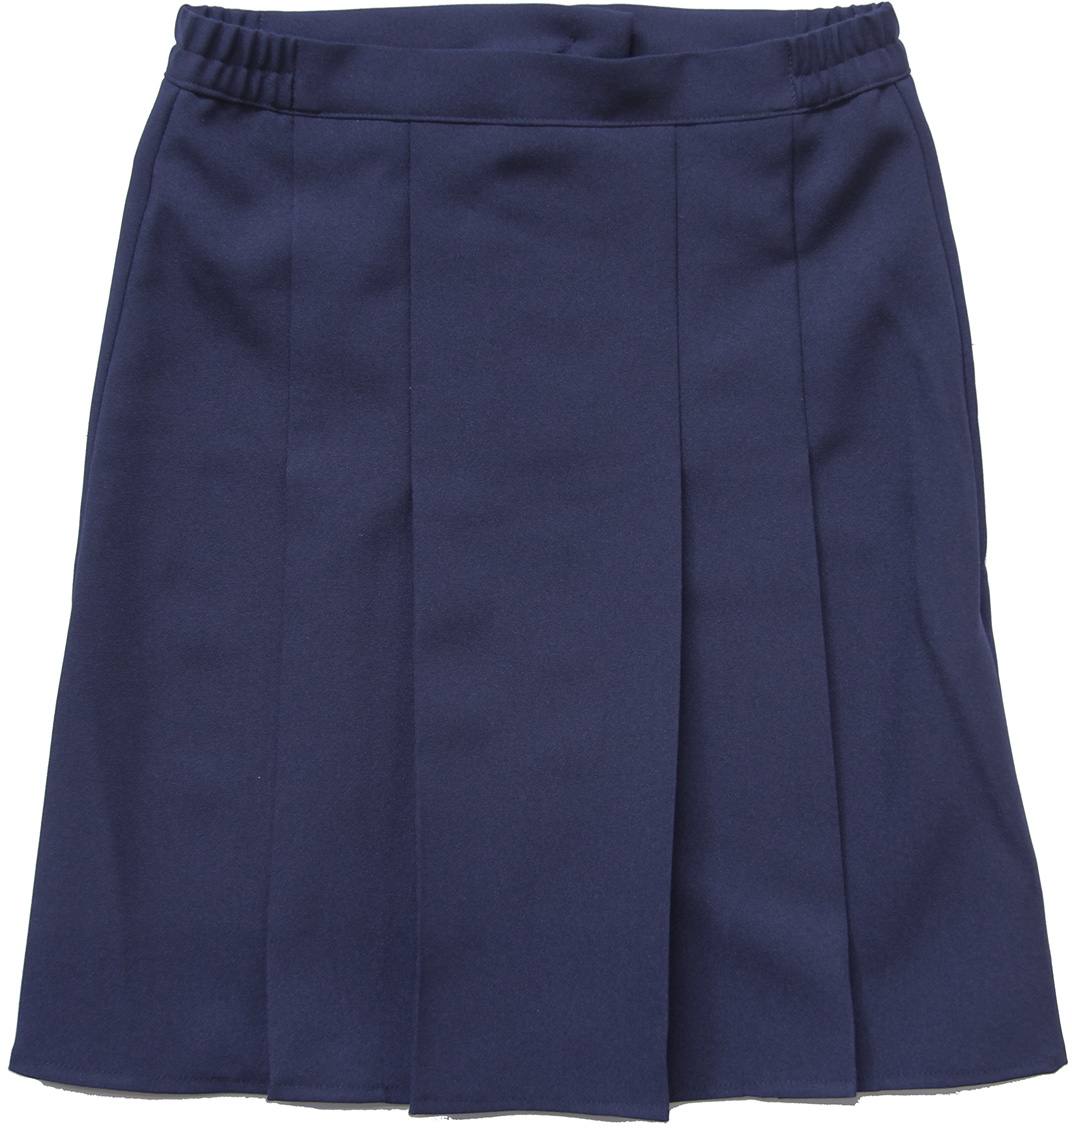 Partiotuote Scout skirt girl’s sizes Blue 150 cm